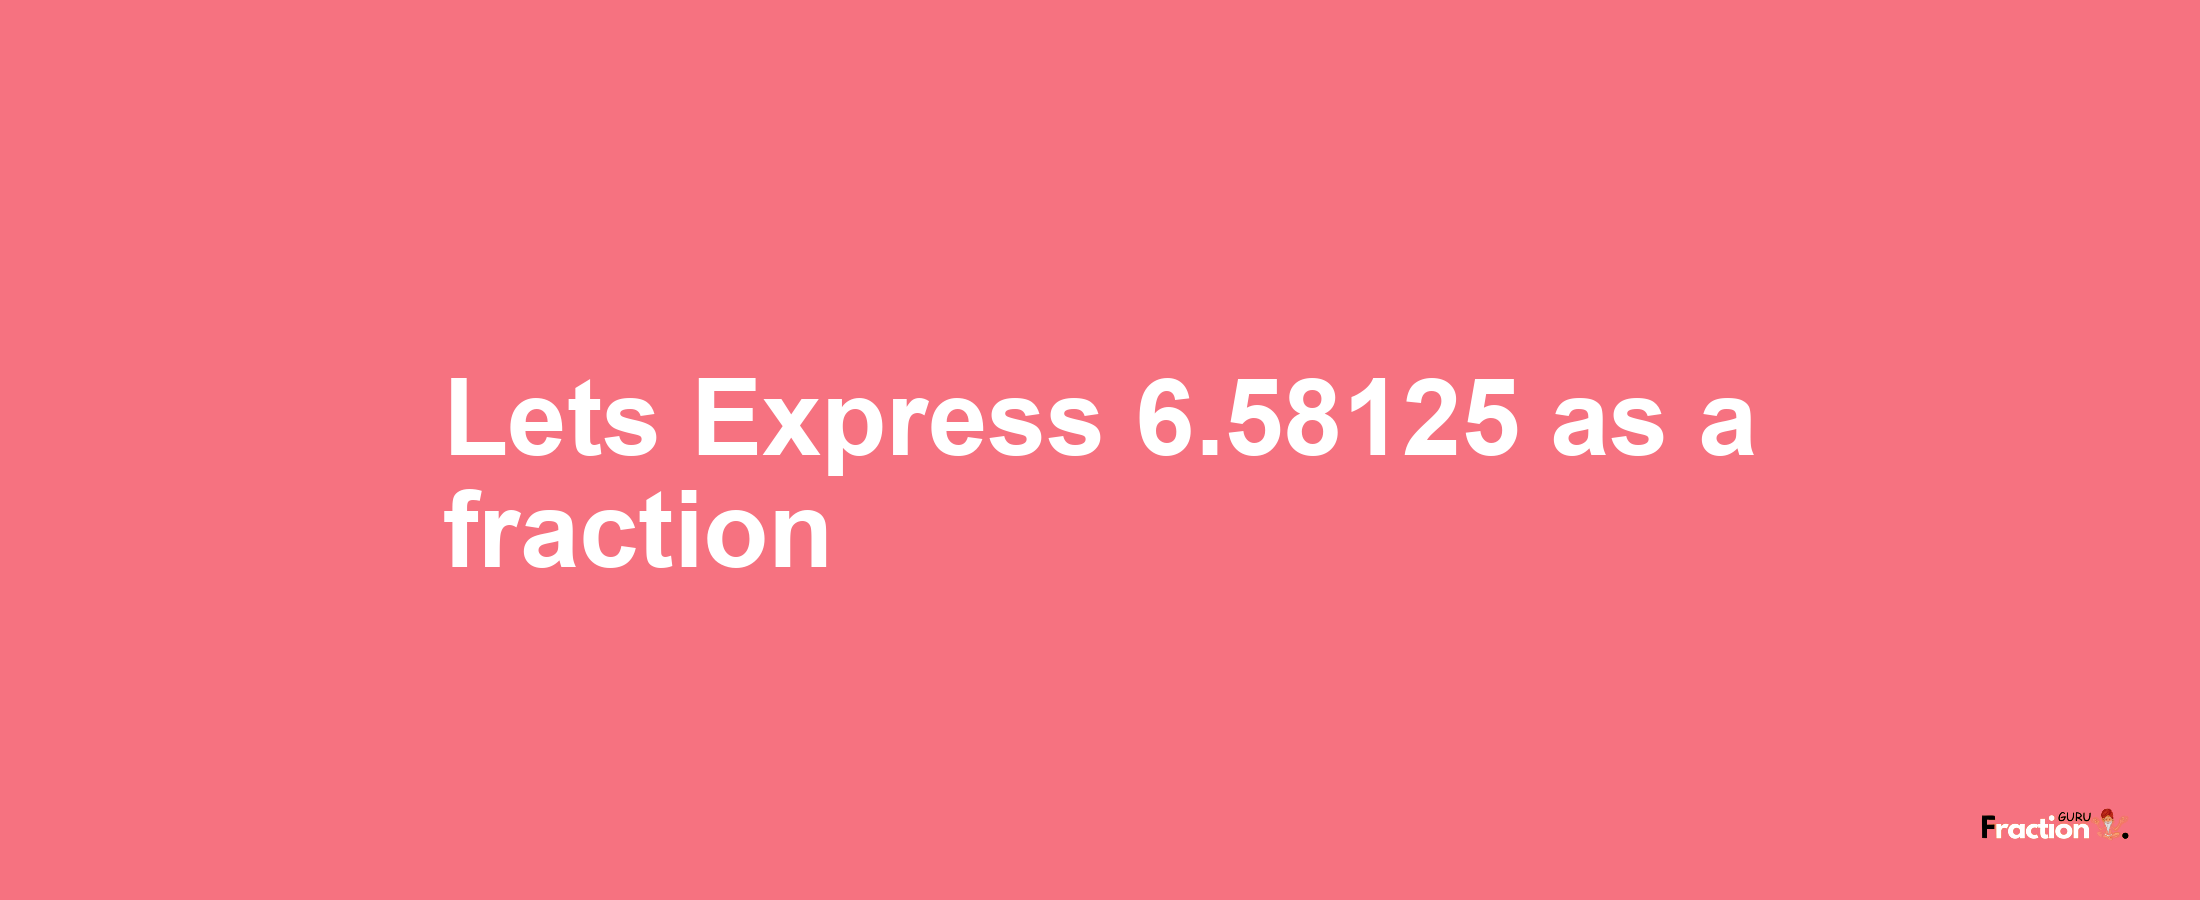 Lets Express 6.58125 as afraction